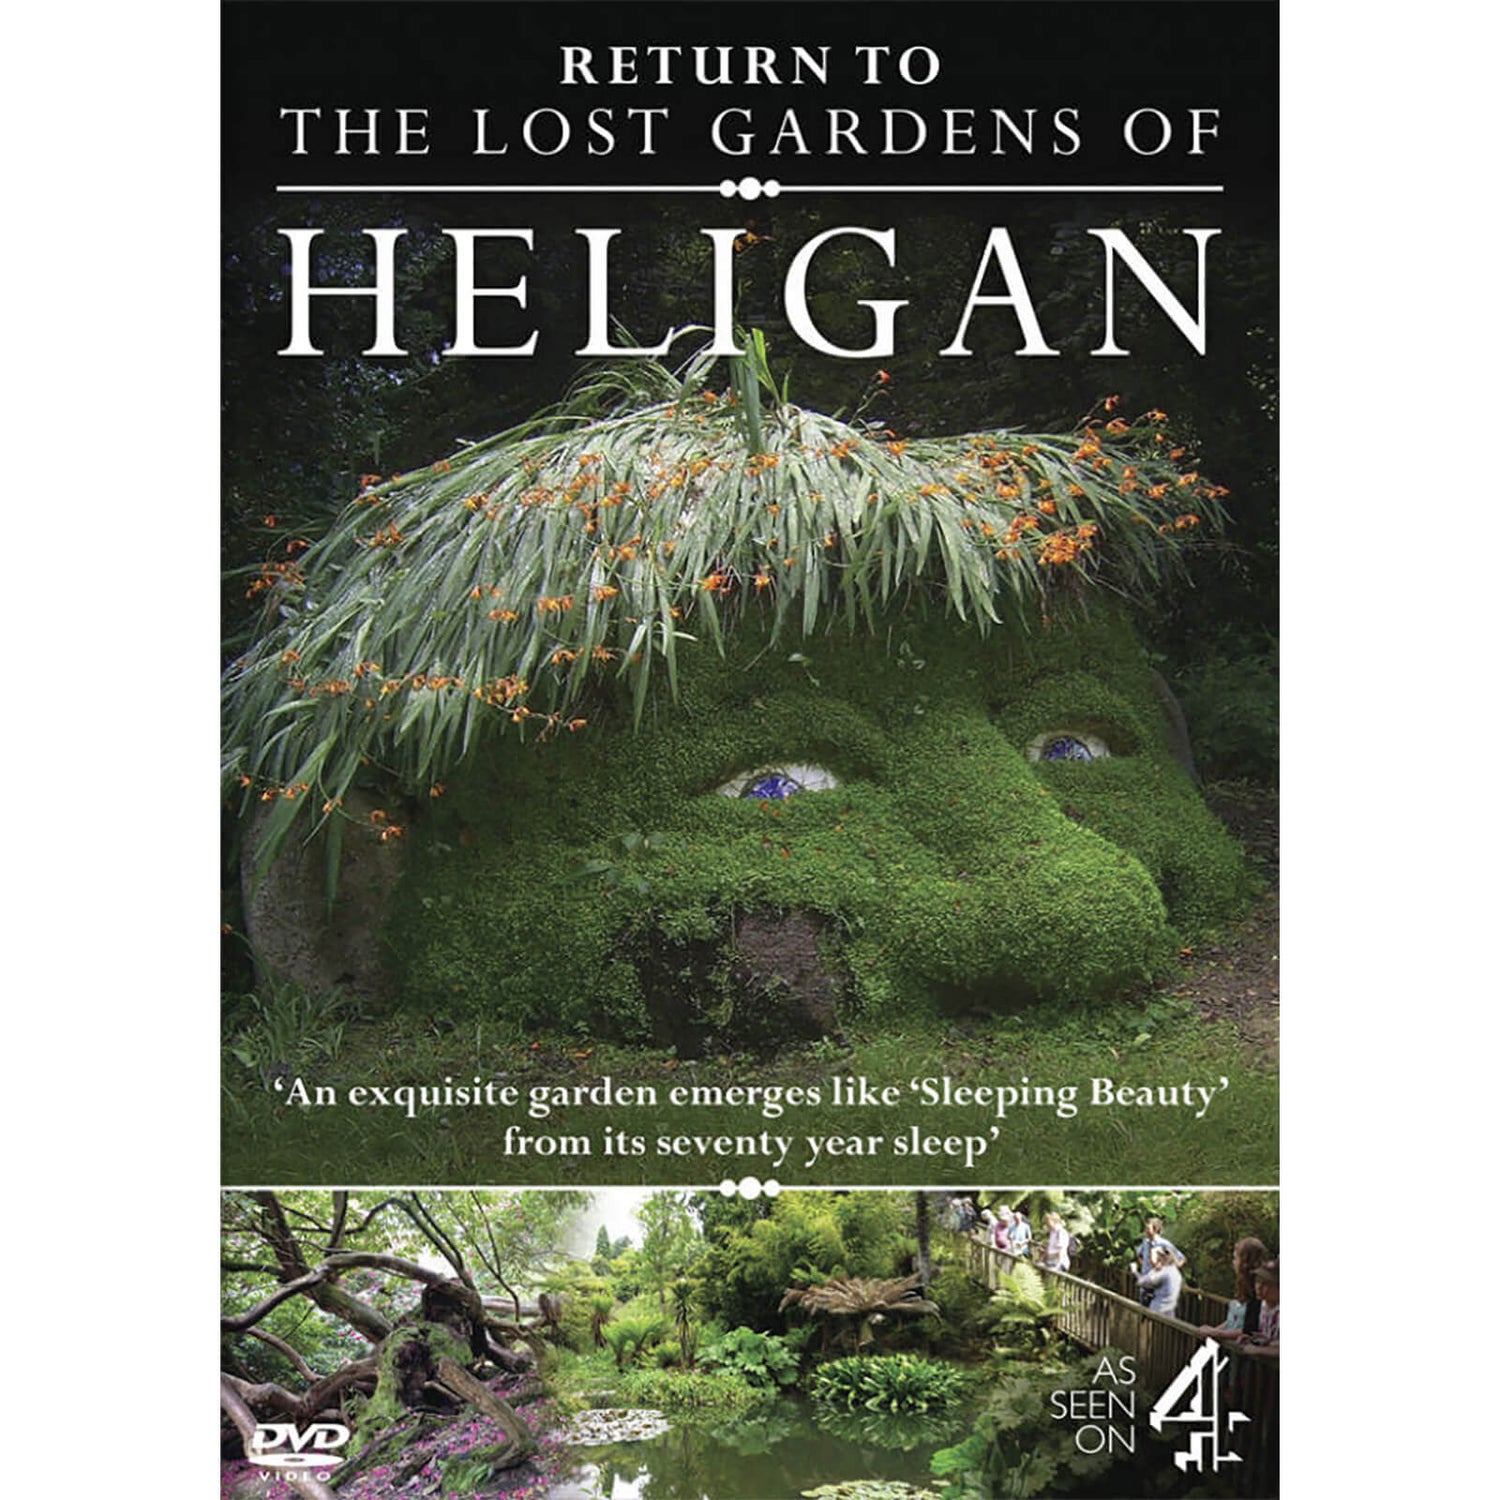 Return to the Lost Gardens of Heligan